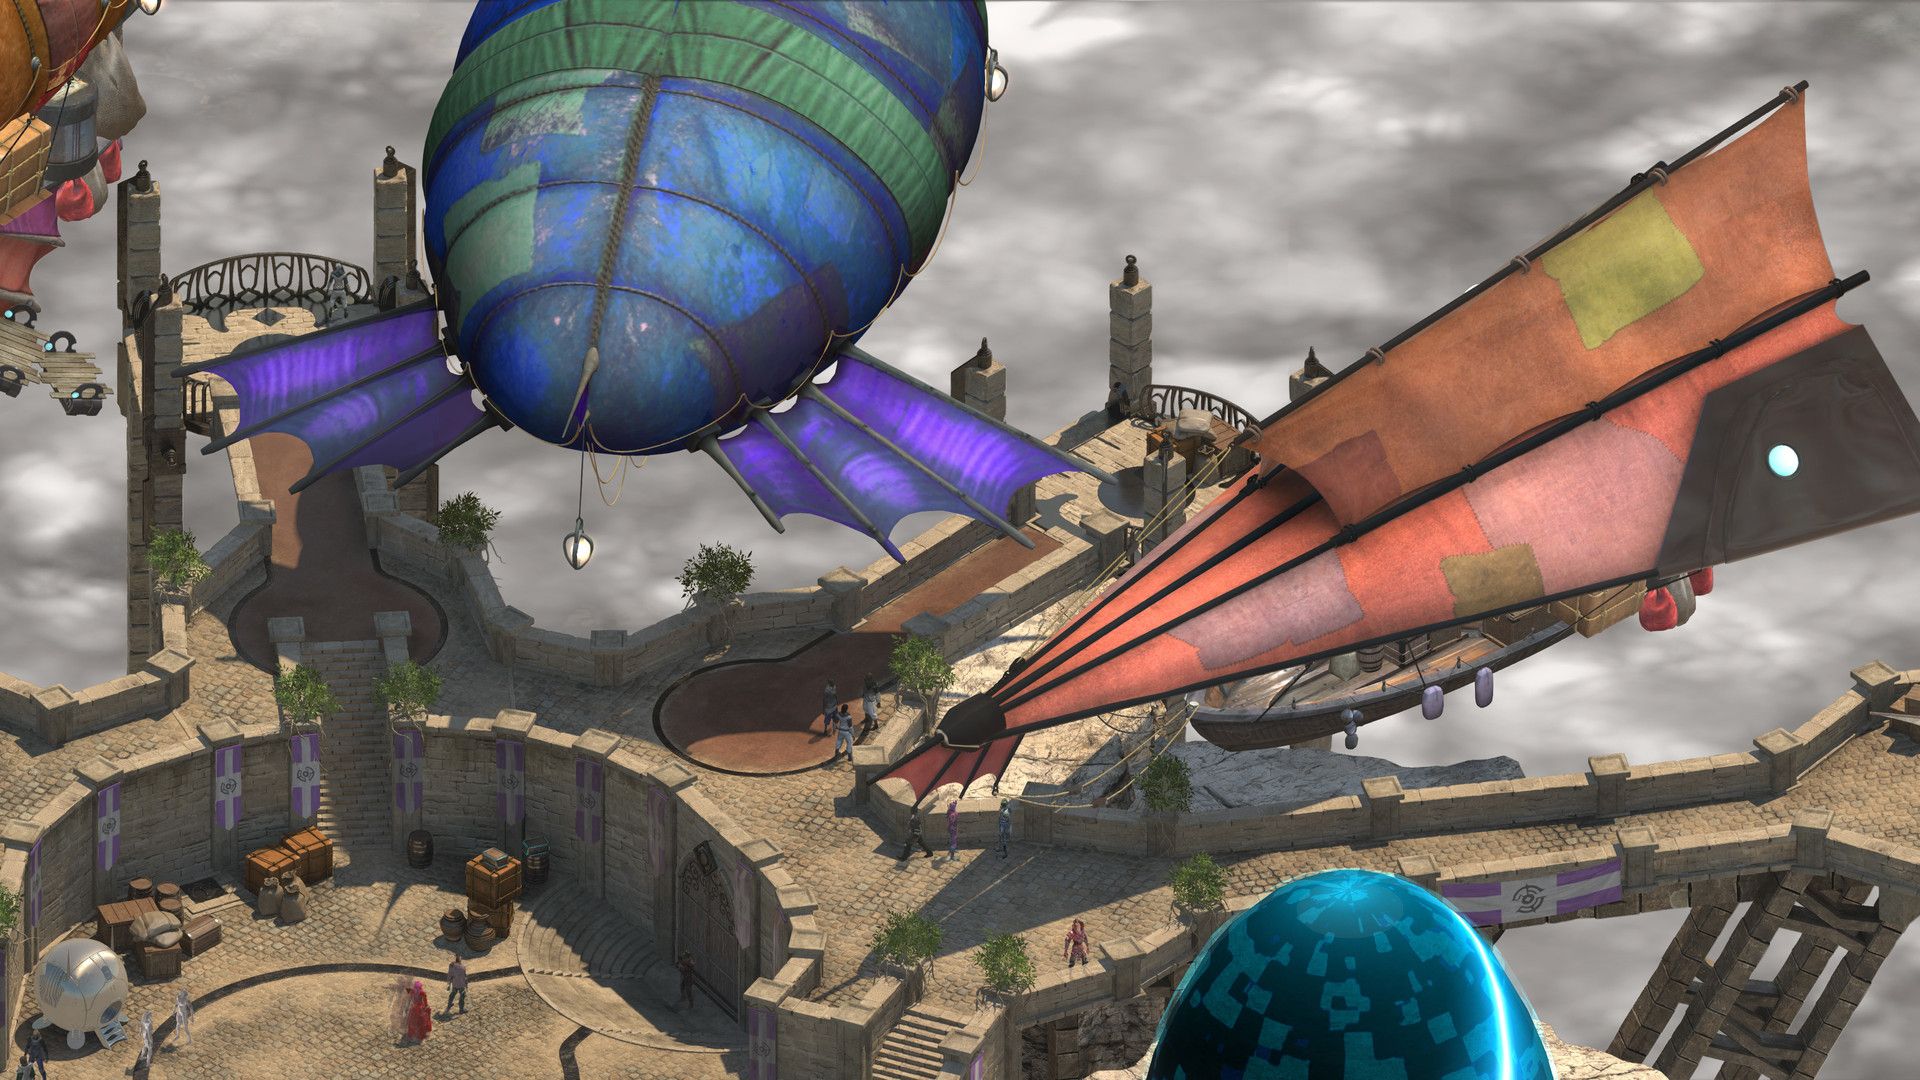 Torment Tides Of Numenera airships docked